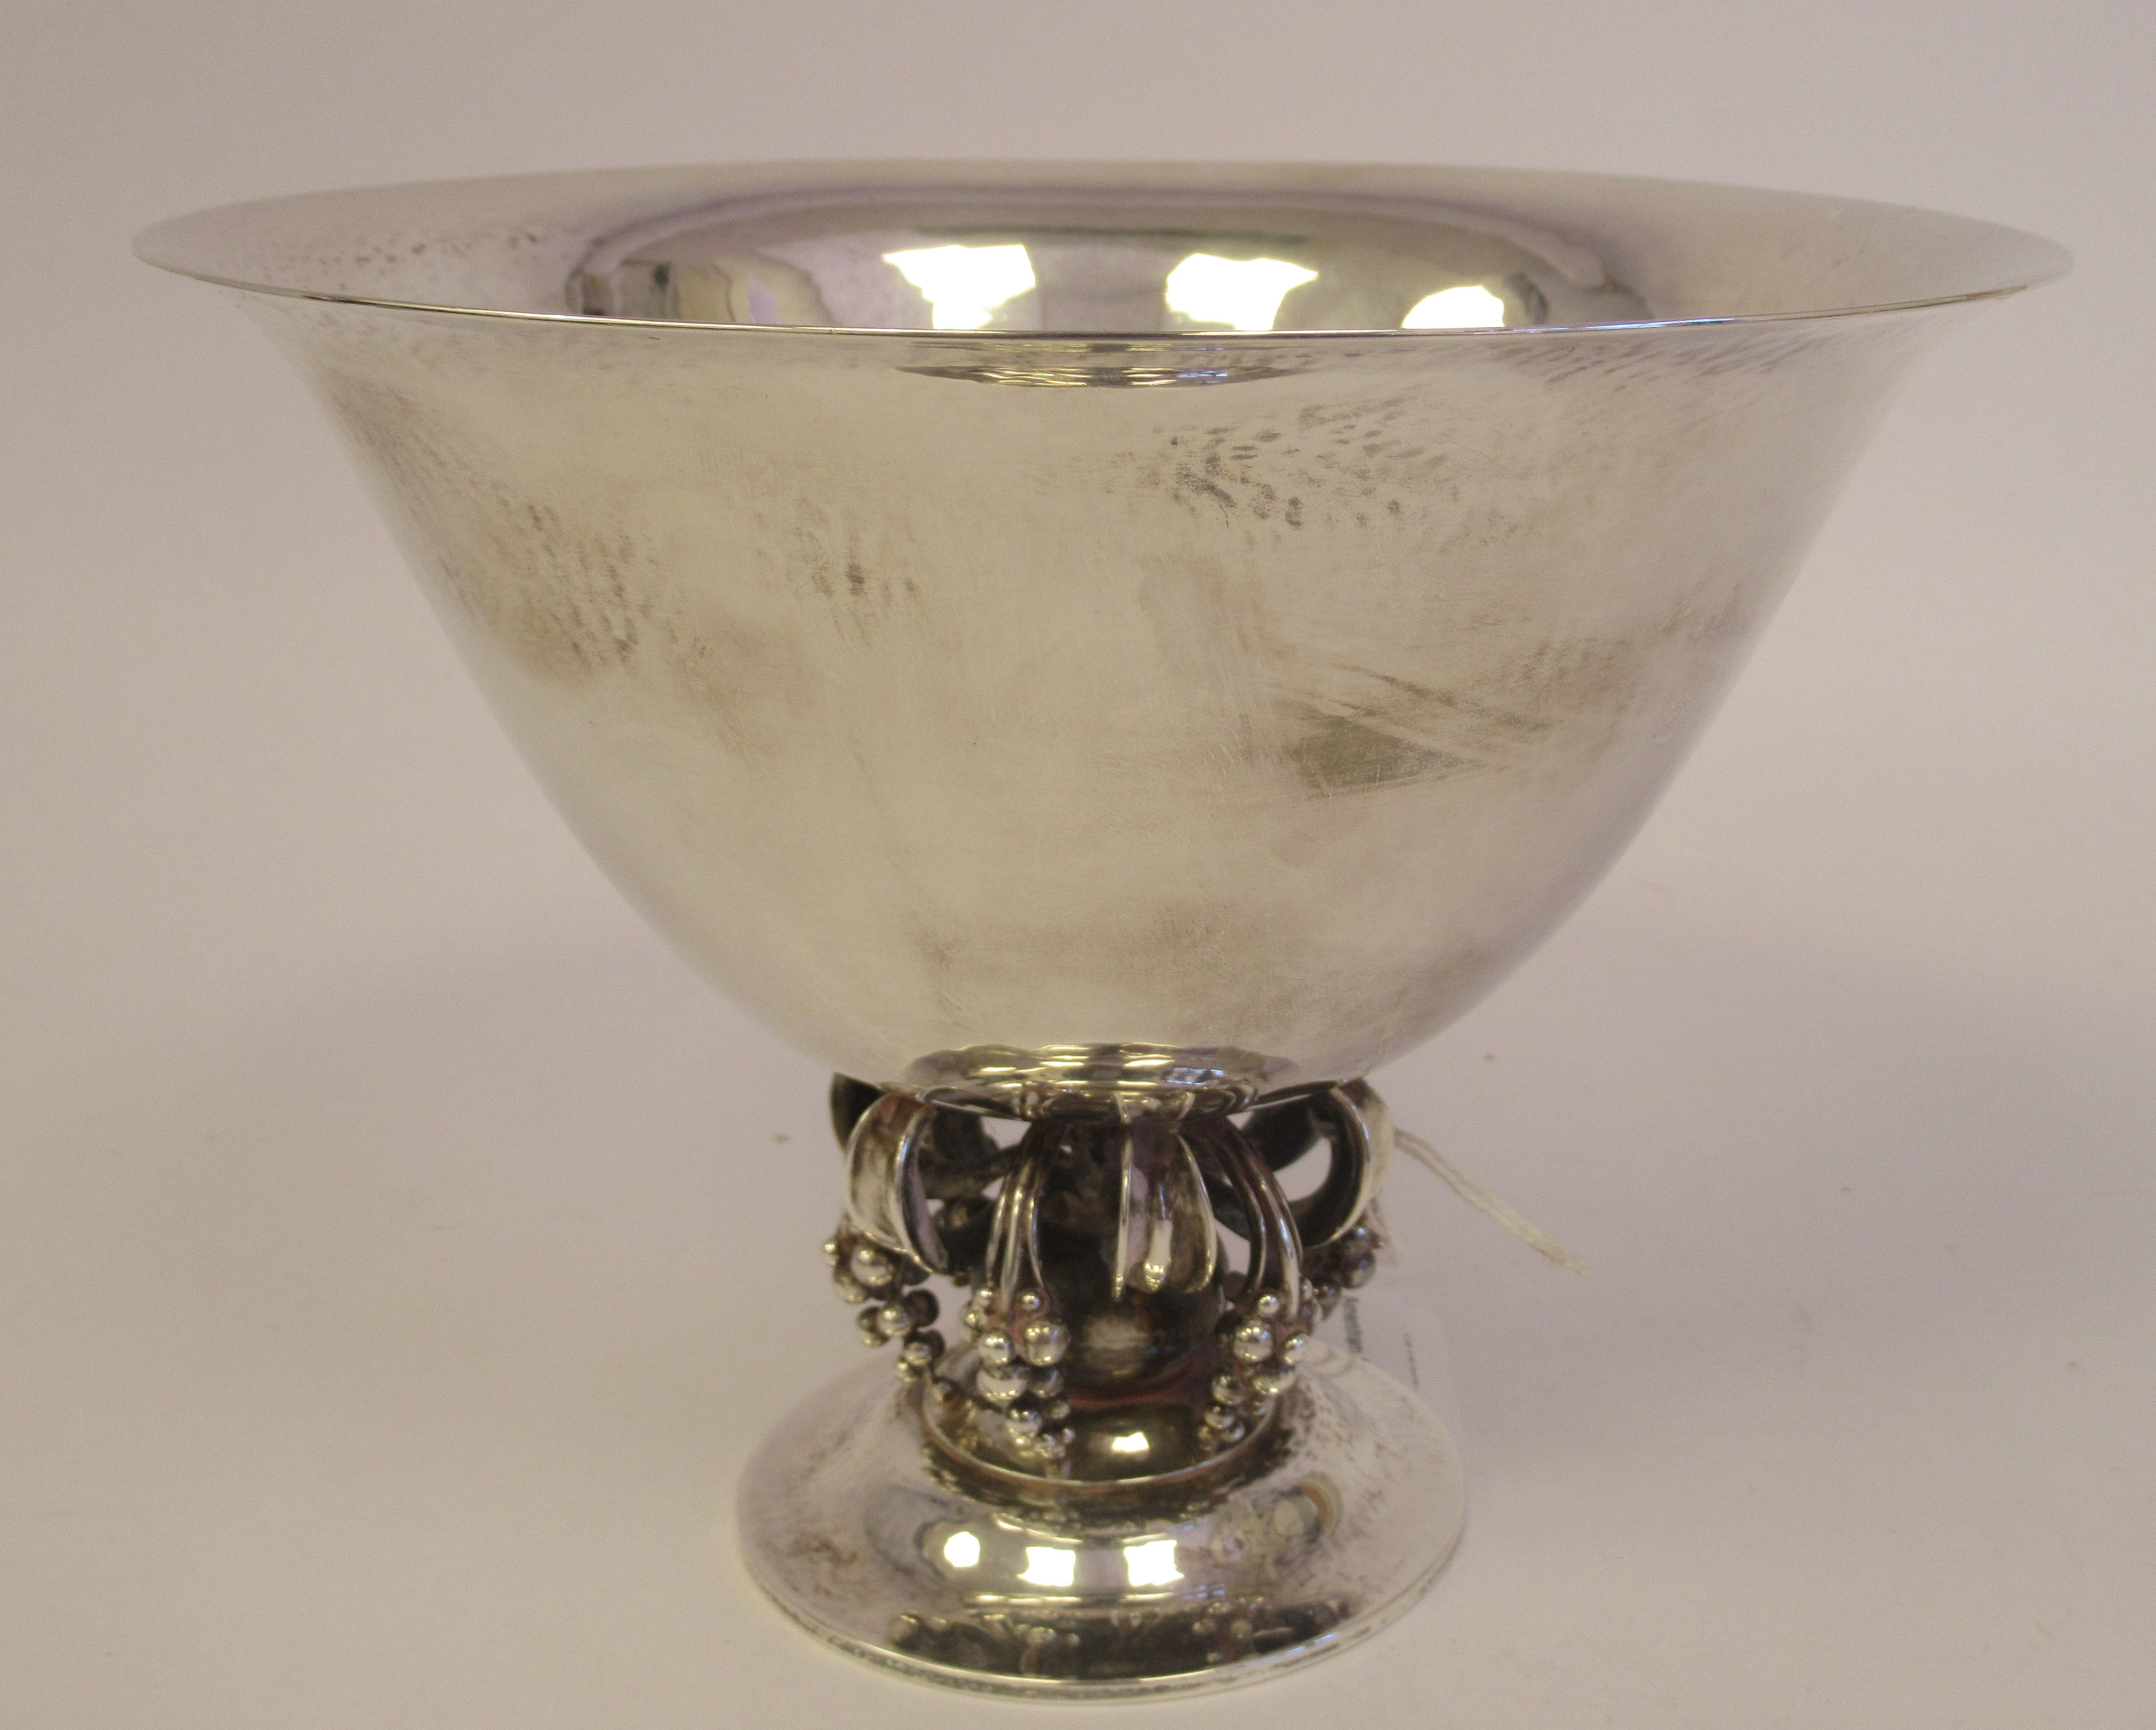 A 1950s Georg Jensen spot-hammered silver bowl, no.775, having wide, flared sides, elevated on short